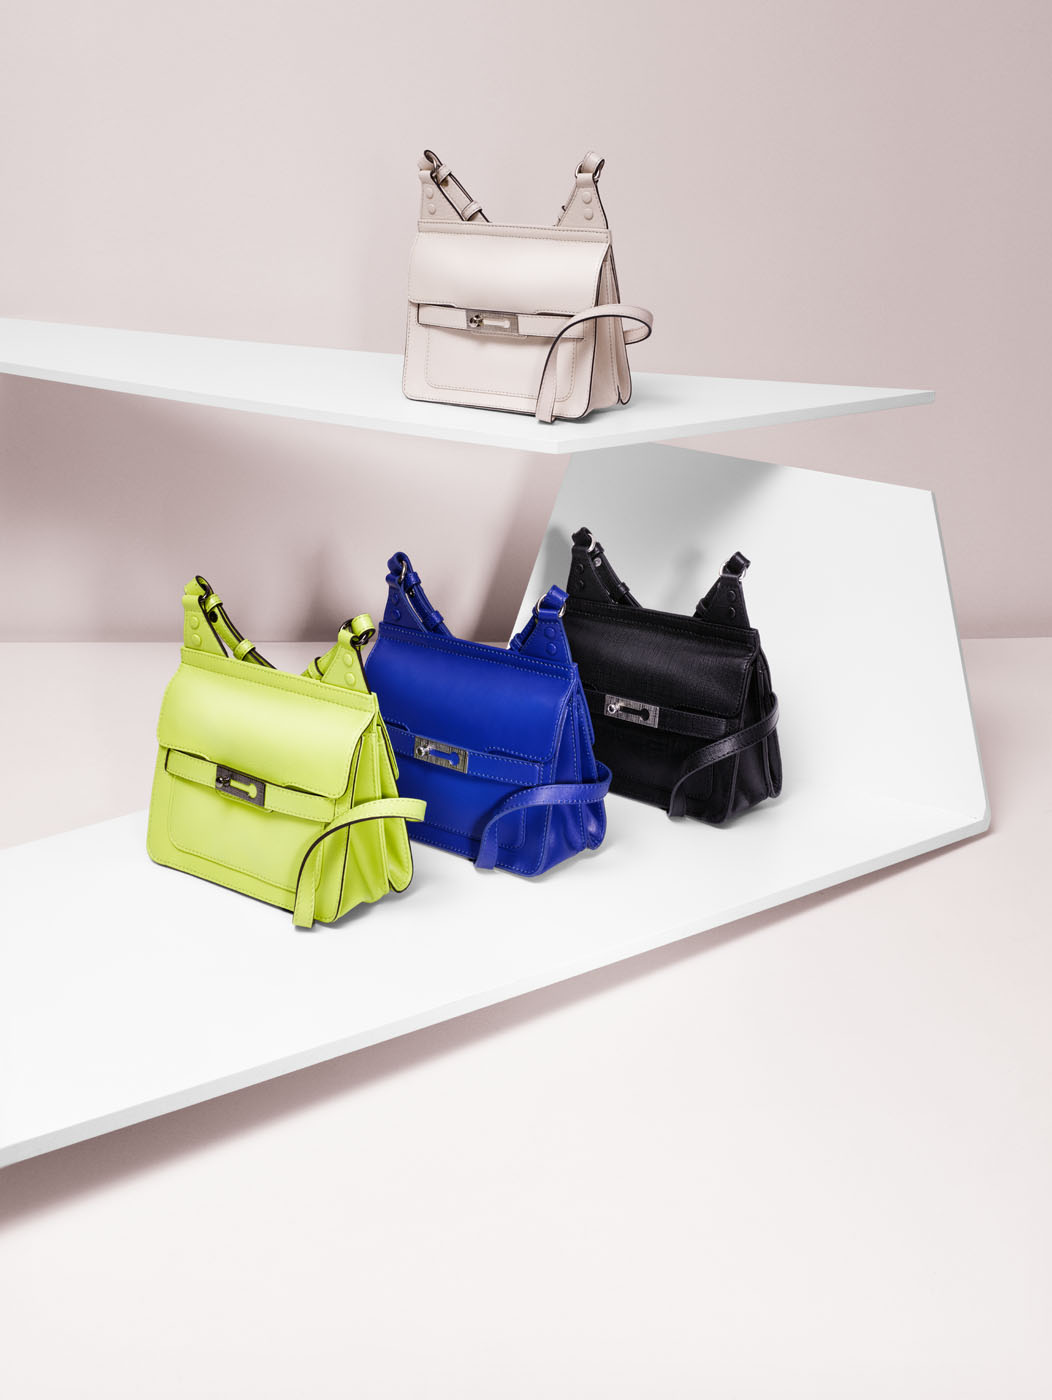 French connection bags in studio by Alexander Kent London based still life and product photographer.